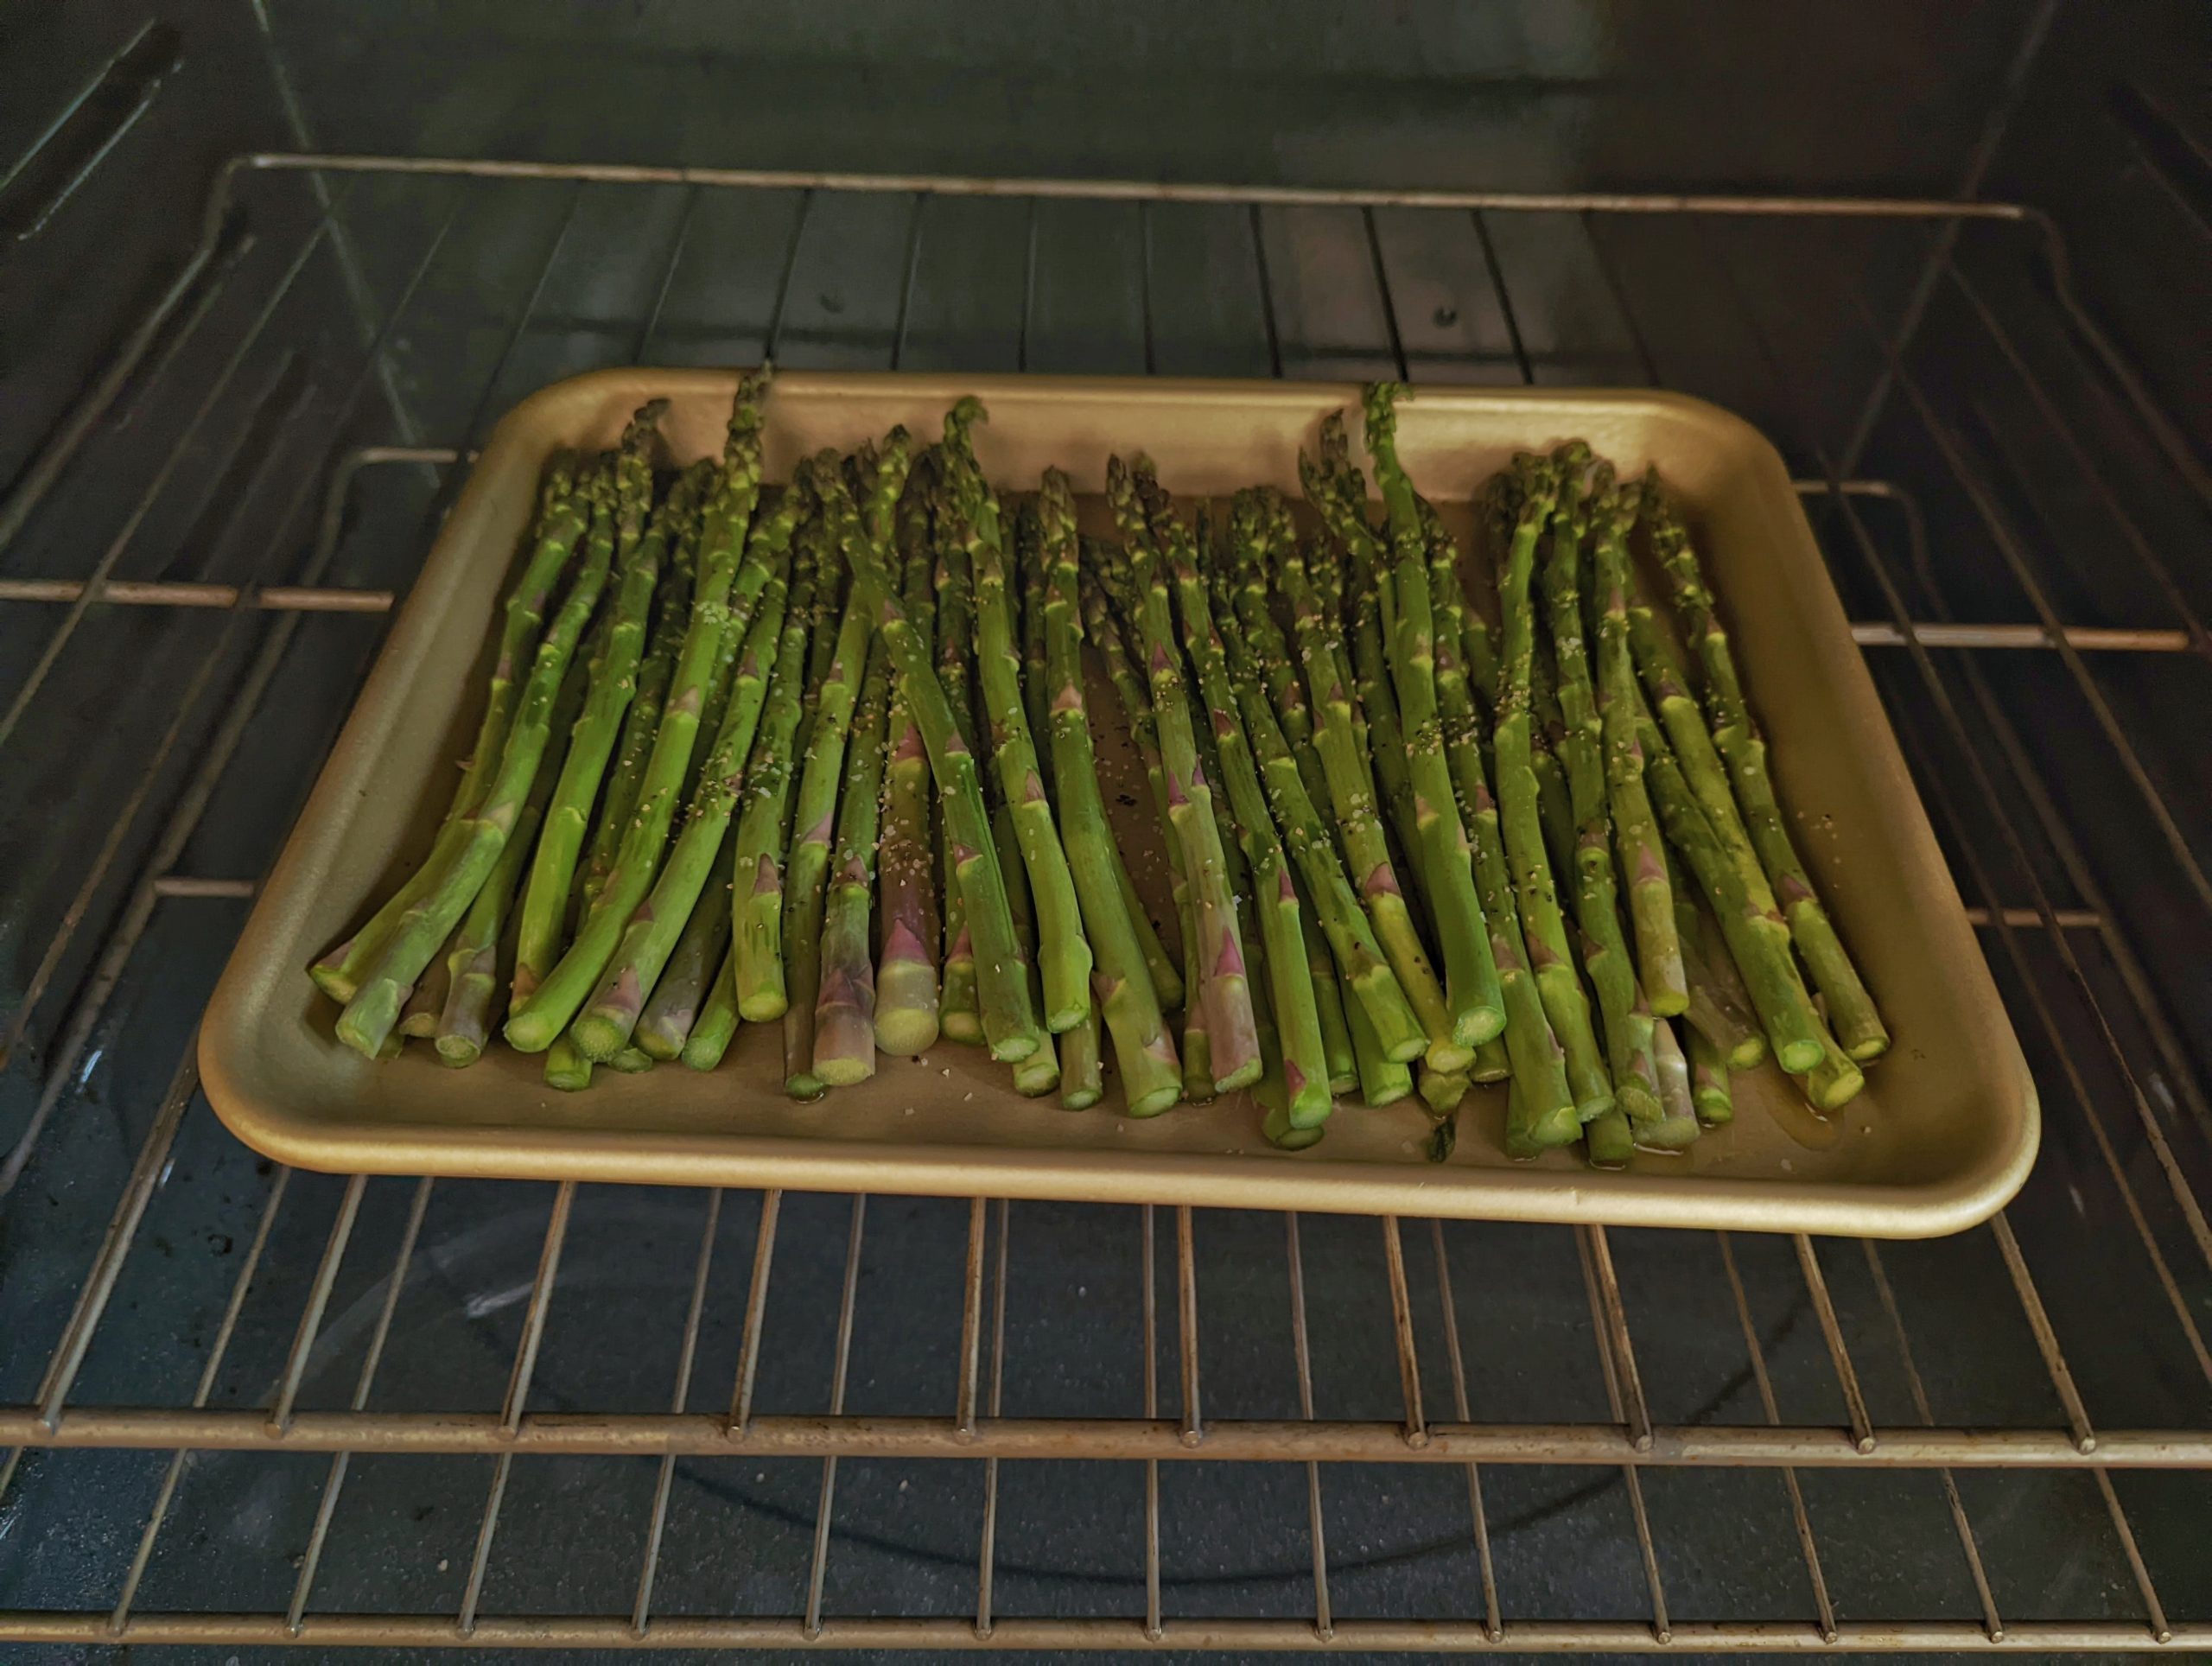 Asparagus baking in the oven.